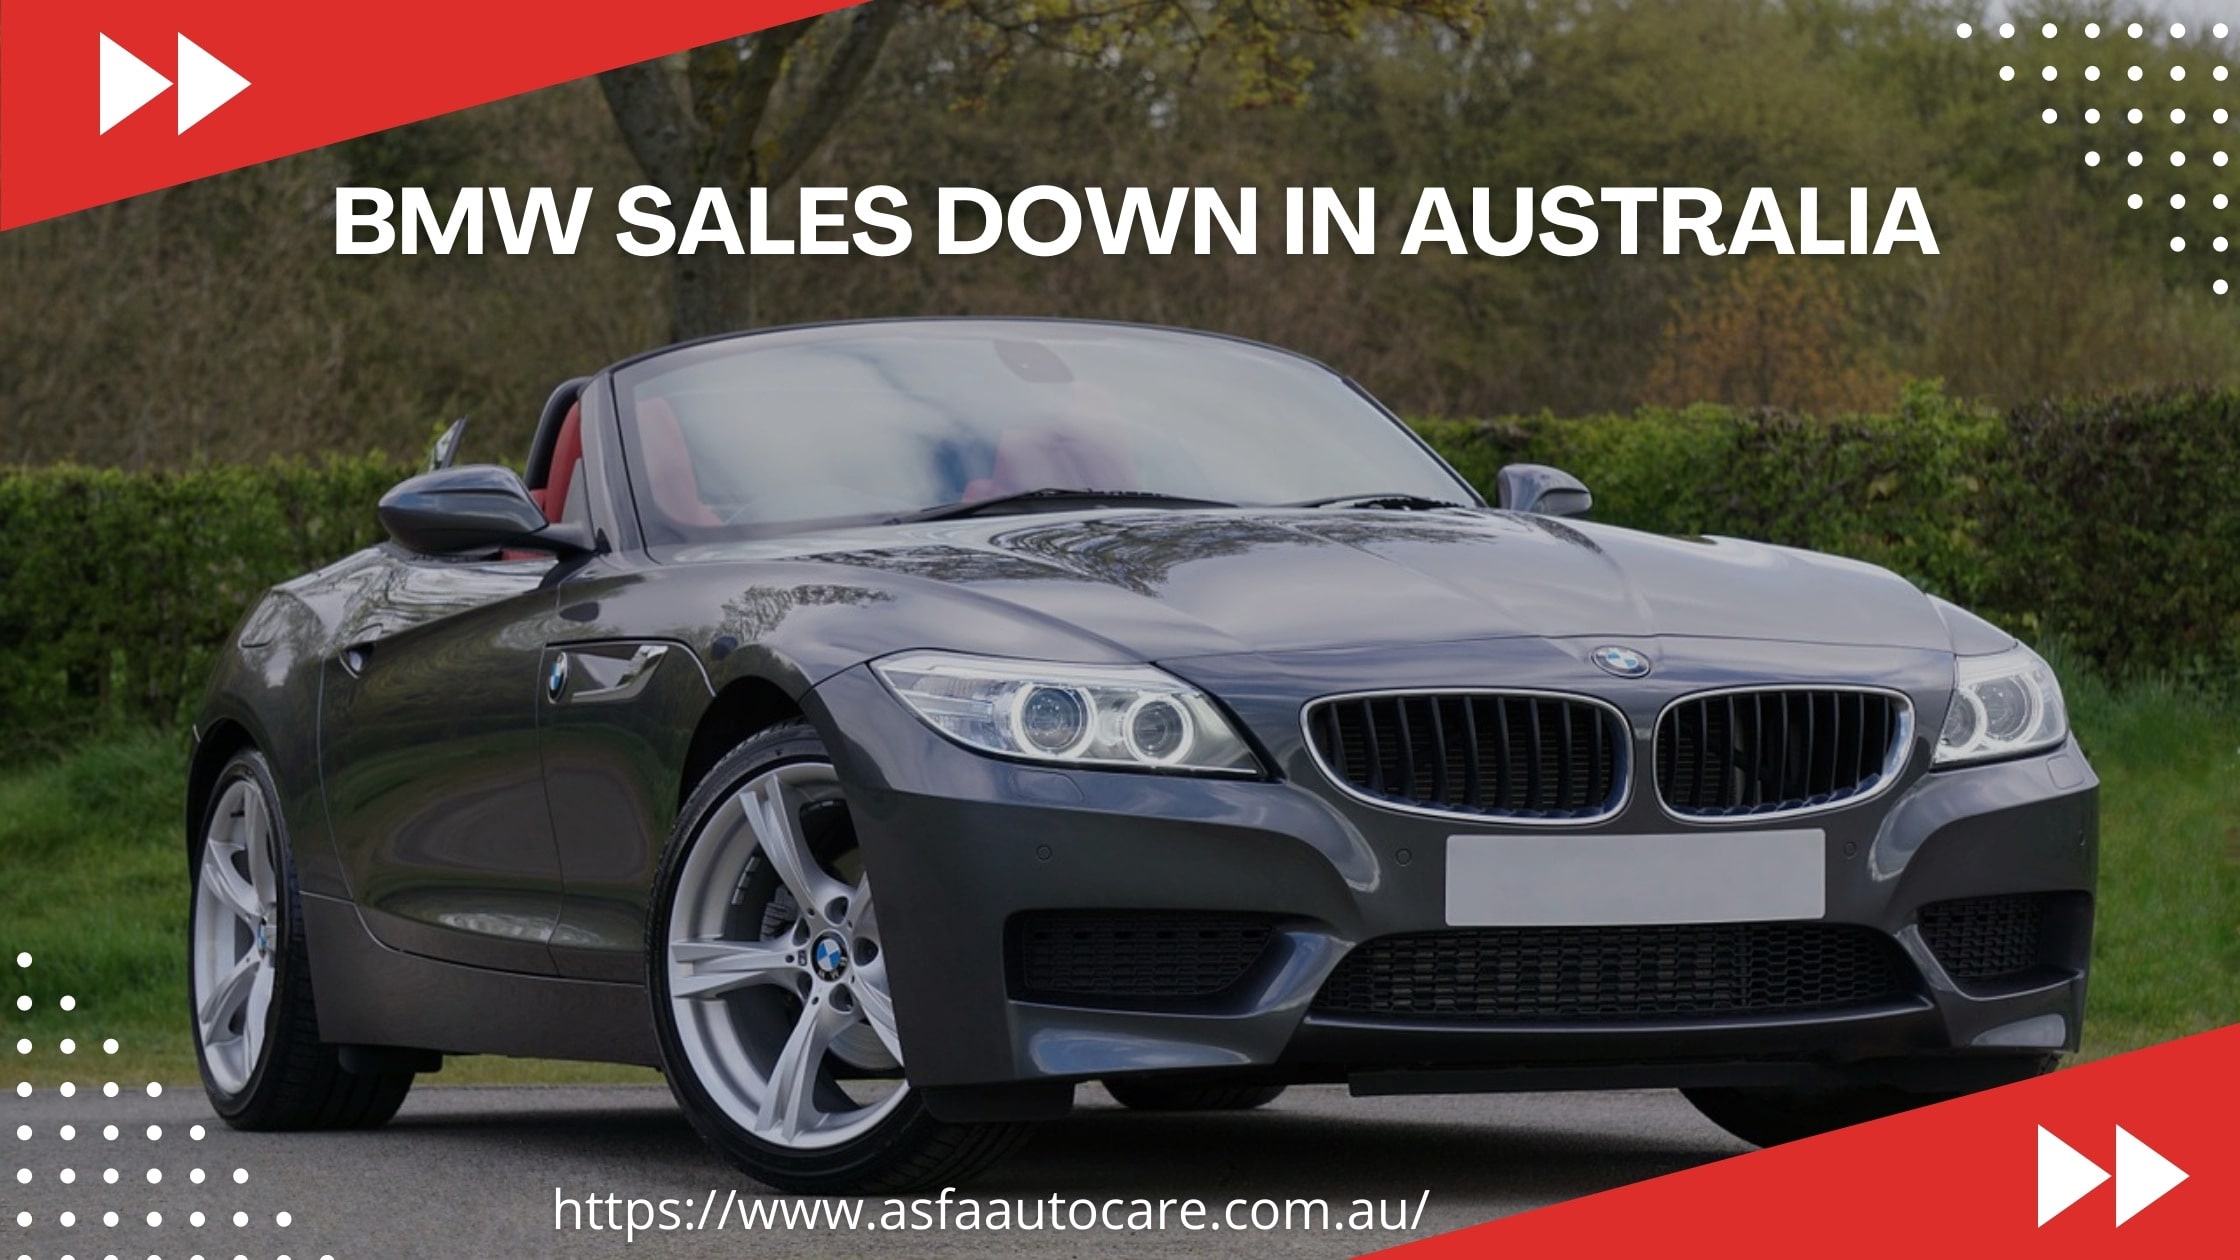 BMW Sales Down In Australia: Disappointing Month For Top Car Brands